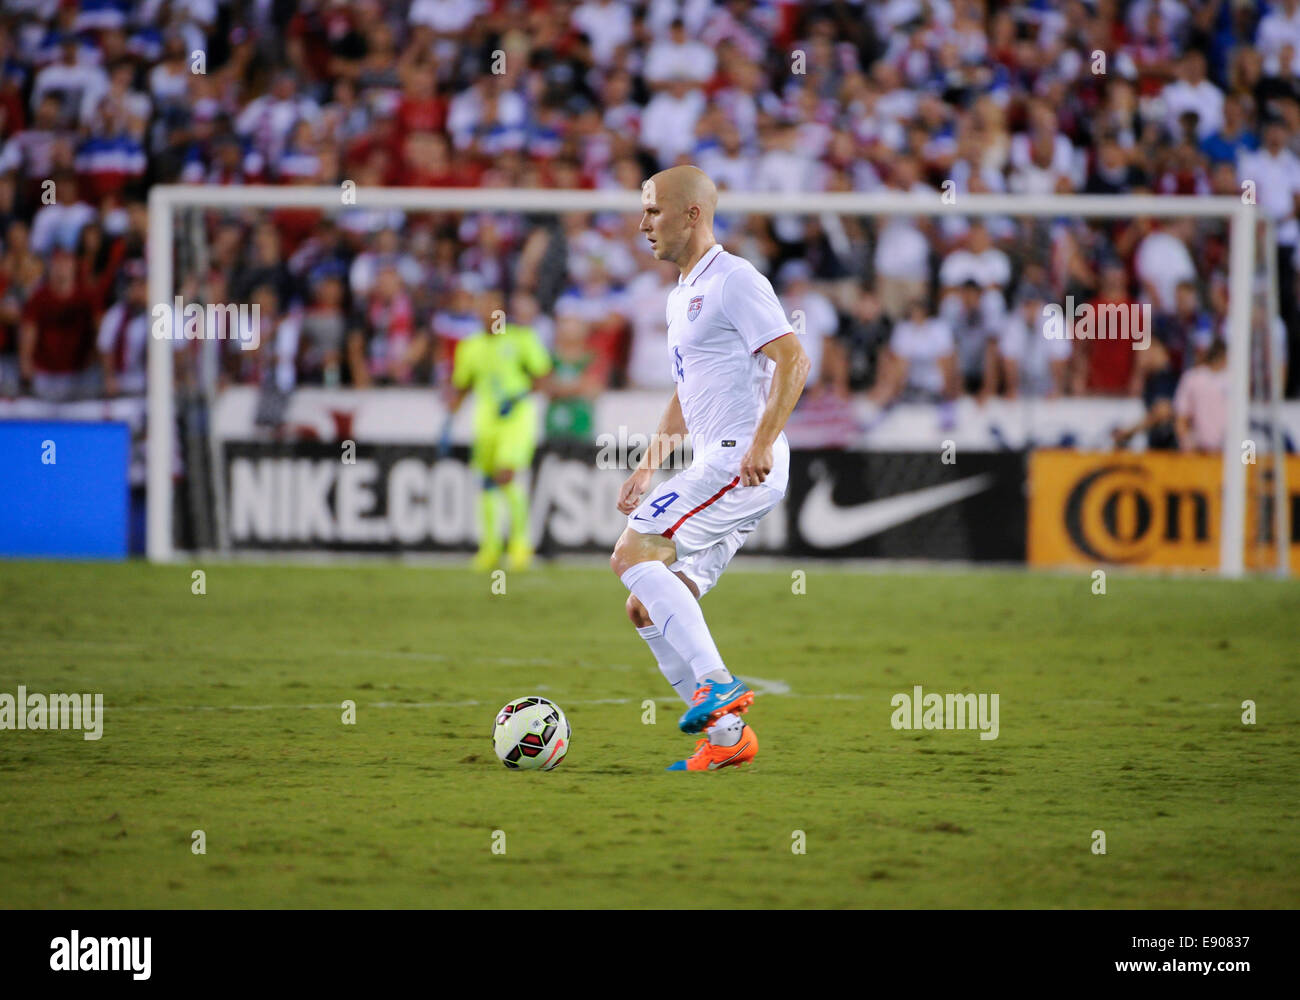 Florida, USA. 14th Oct, 2014. United States Midfielder Michael Bradley (4) controls the ball during the international friendly between the US Men's National Team and Honduras at FAU Stadium in Boca Raton, Florida © Action Plus Sports/Alamy Live News Stock Photo